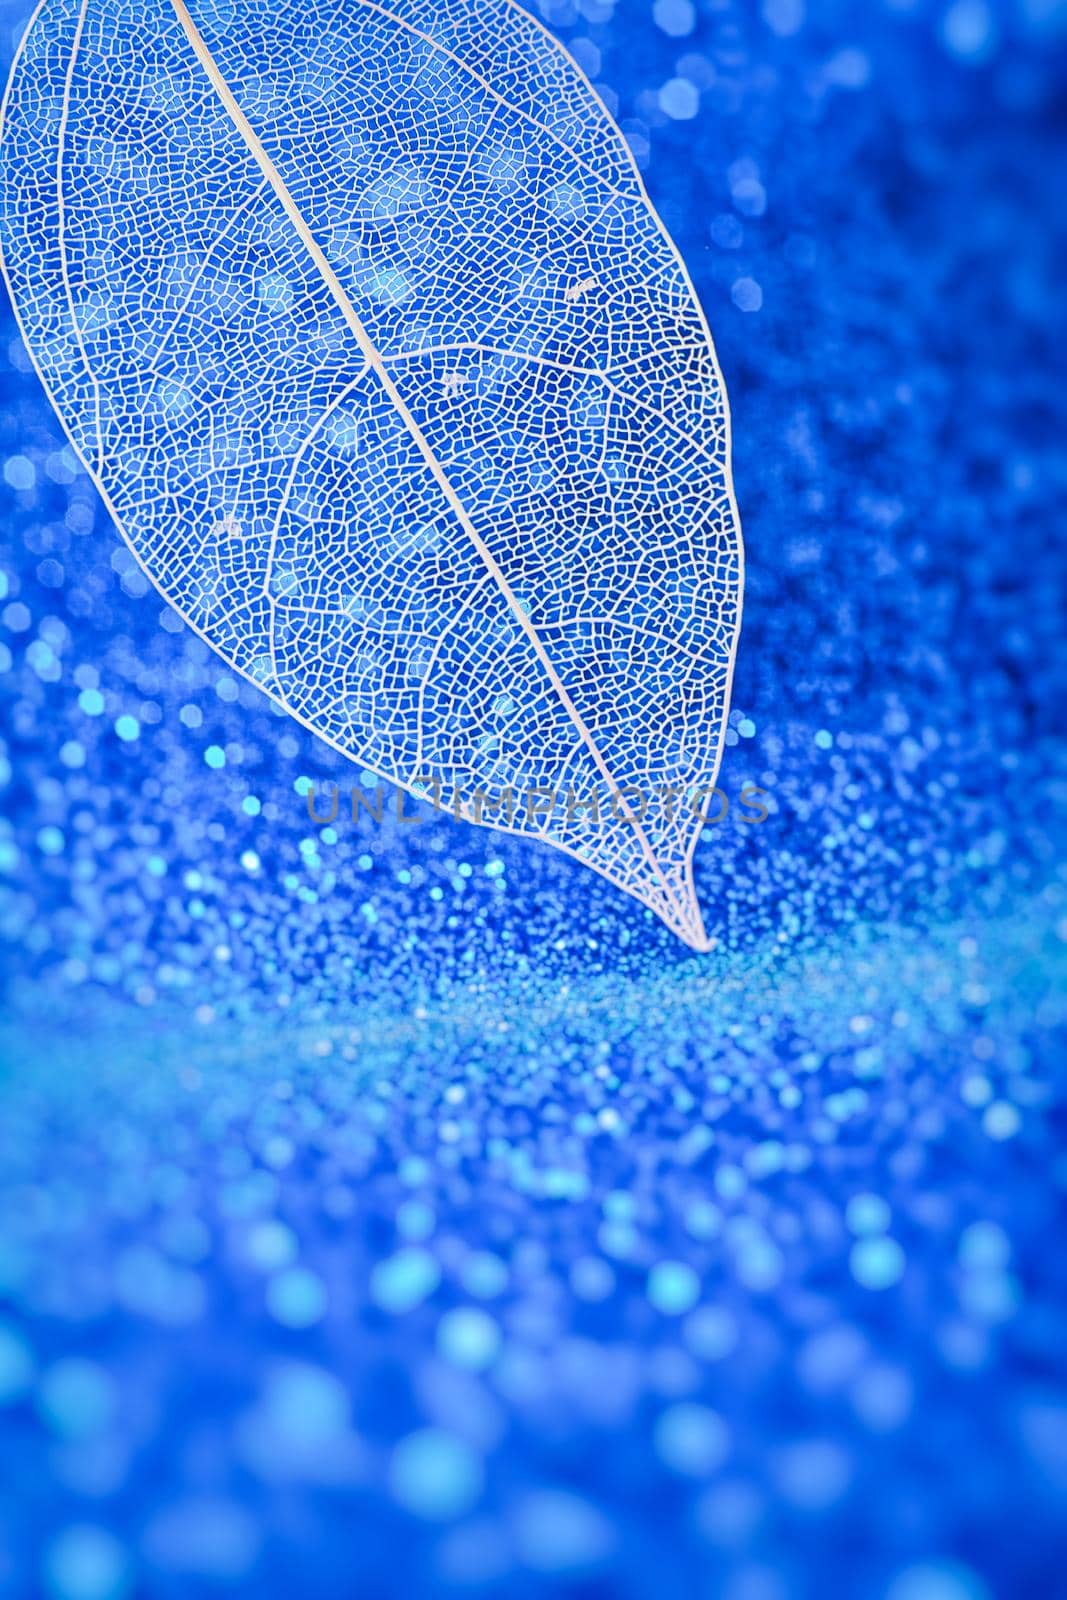 Expressive artistic image of beauty and purity of nature. Beautiful white skeletonized leaf on light blue background with round bokeh.